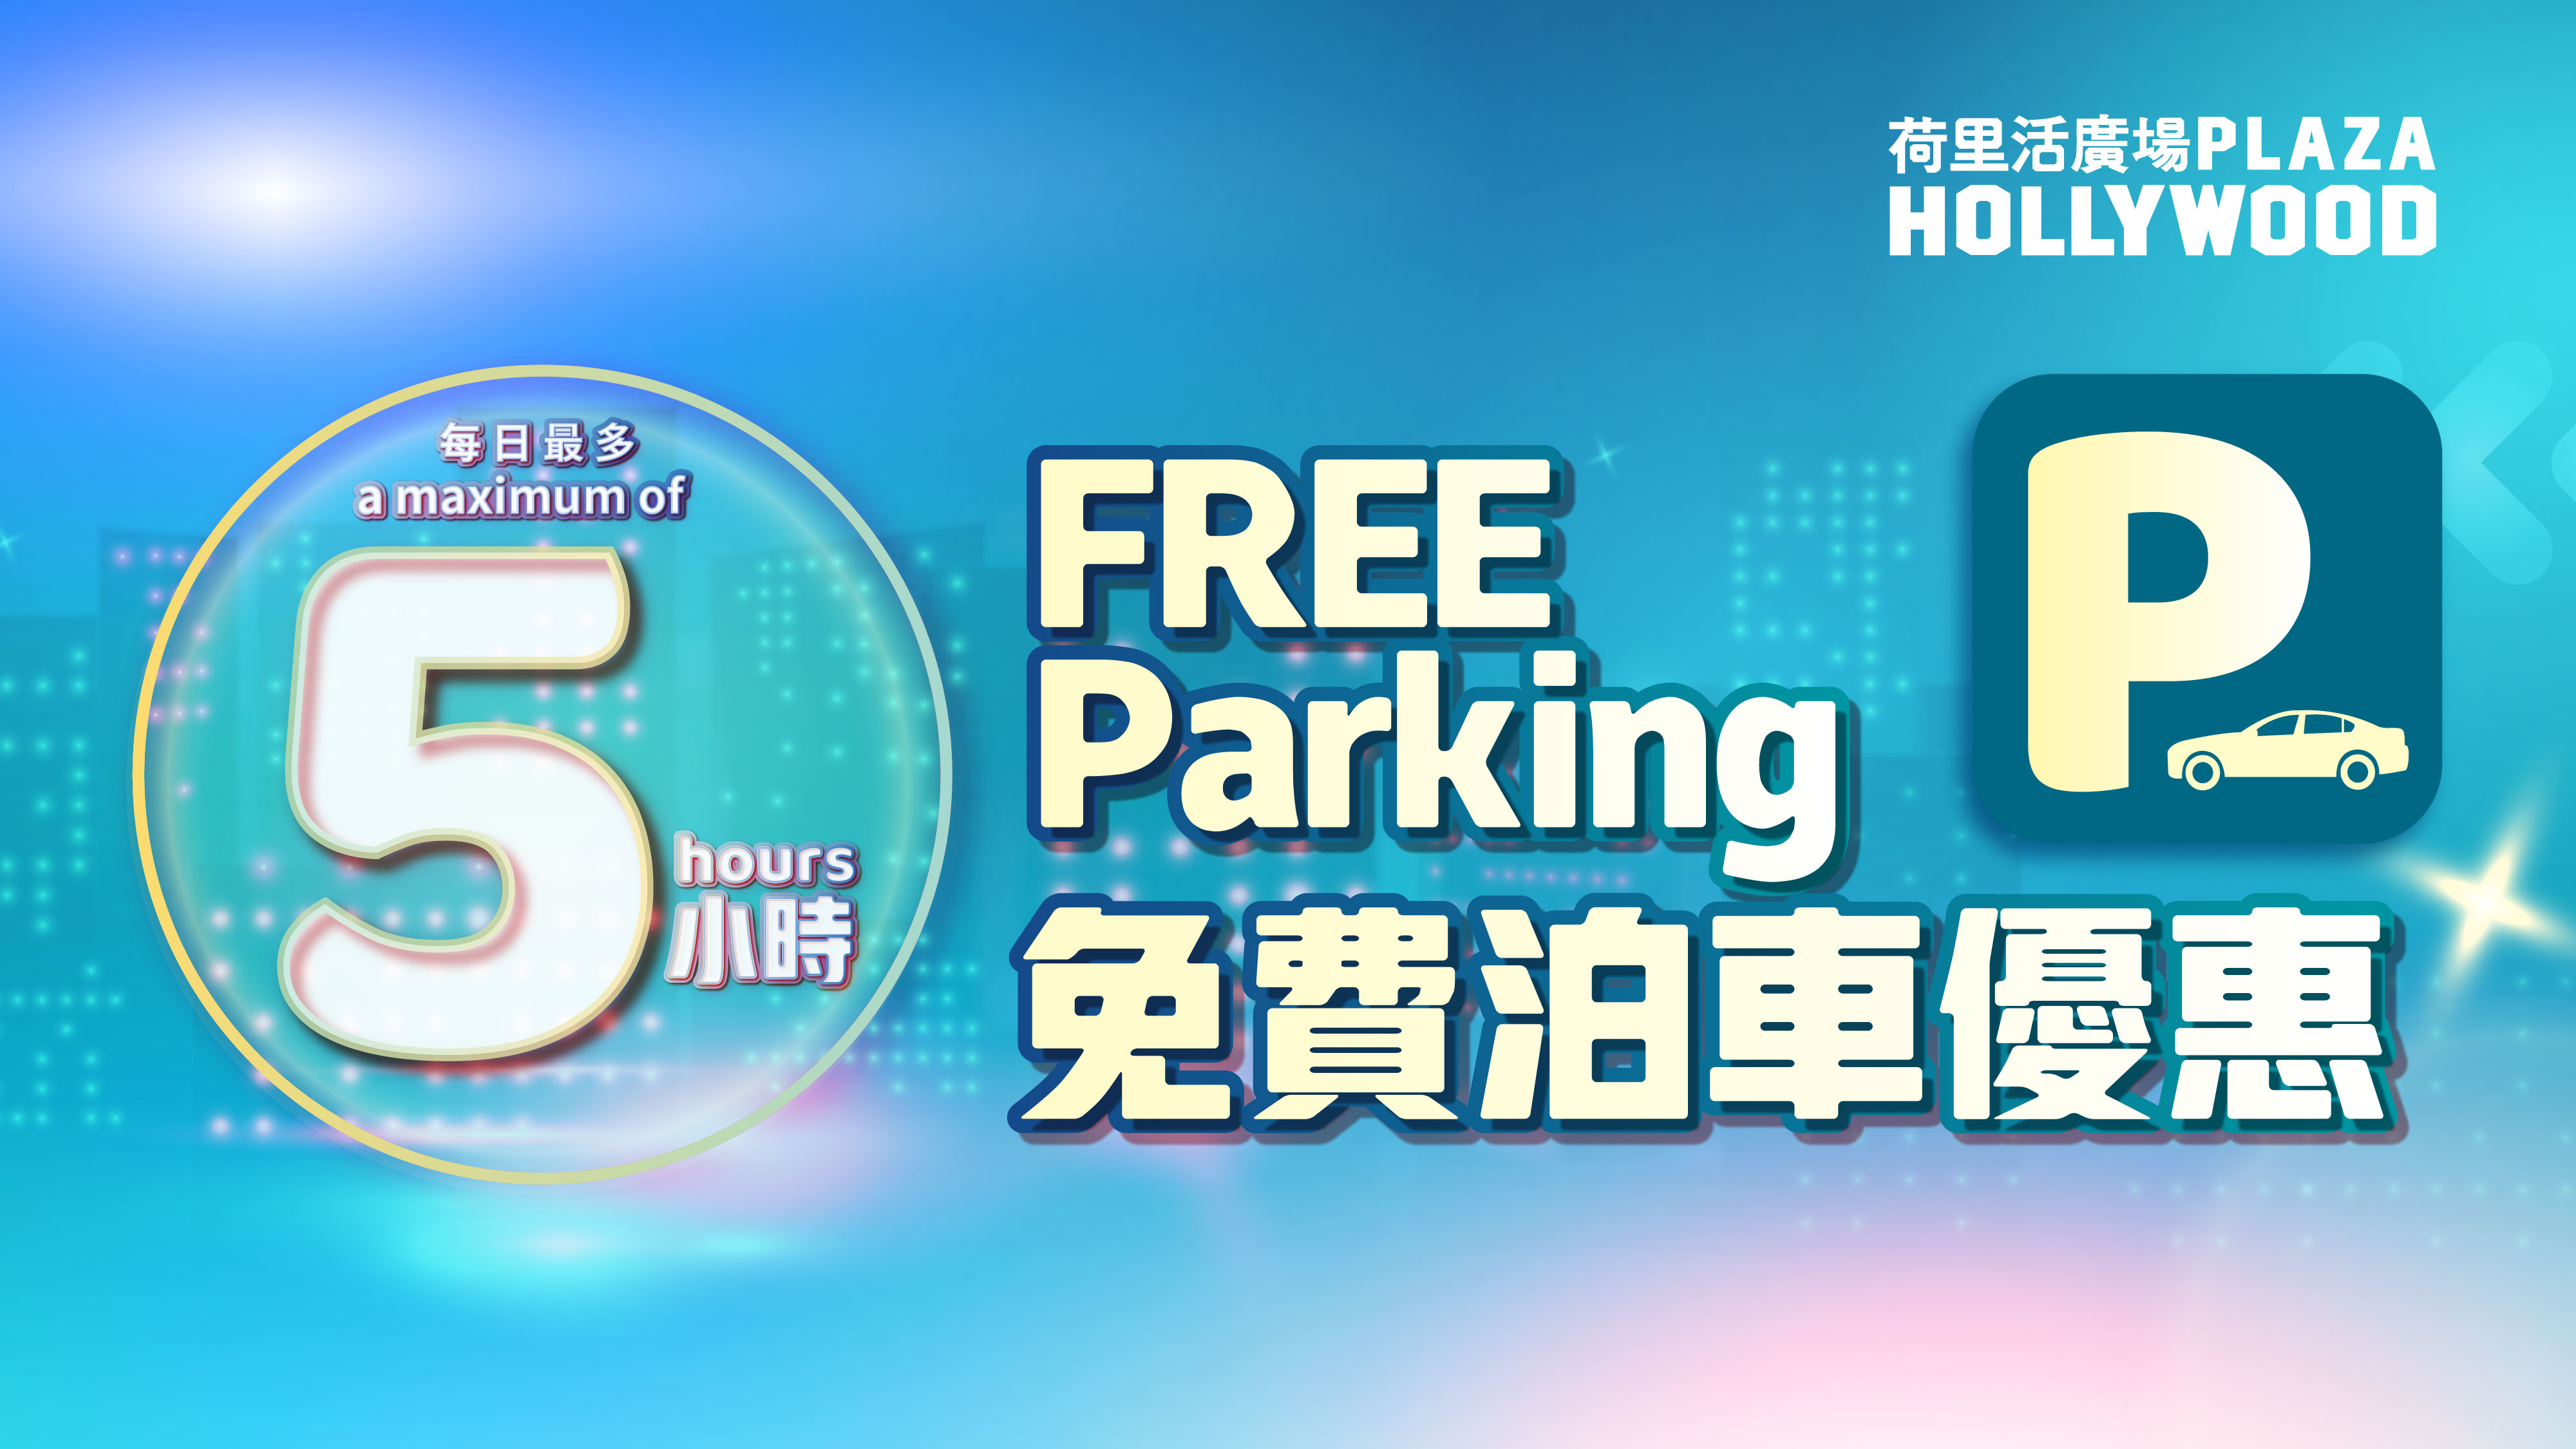 Complimentary FREE Parking